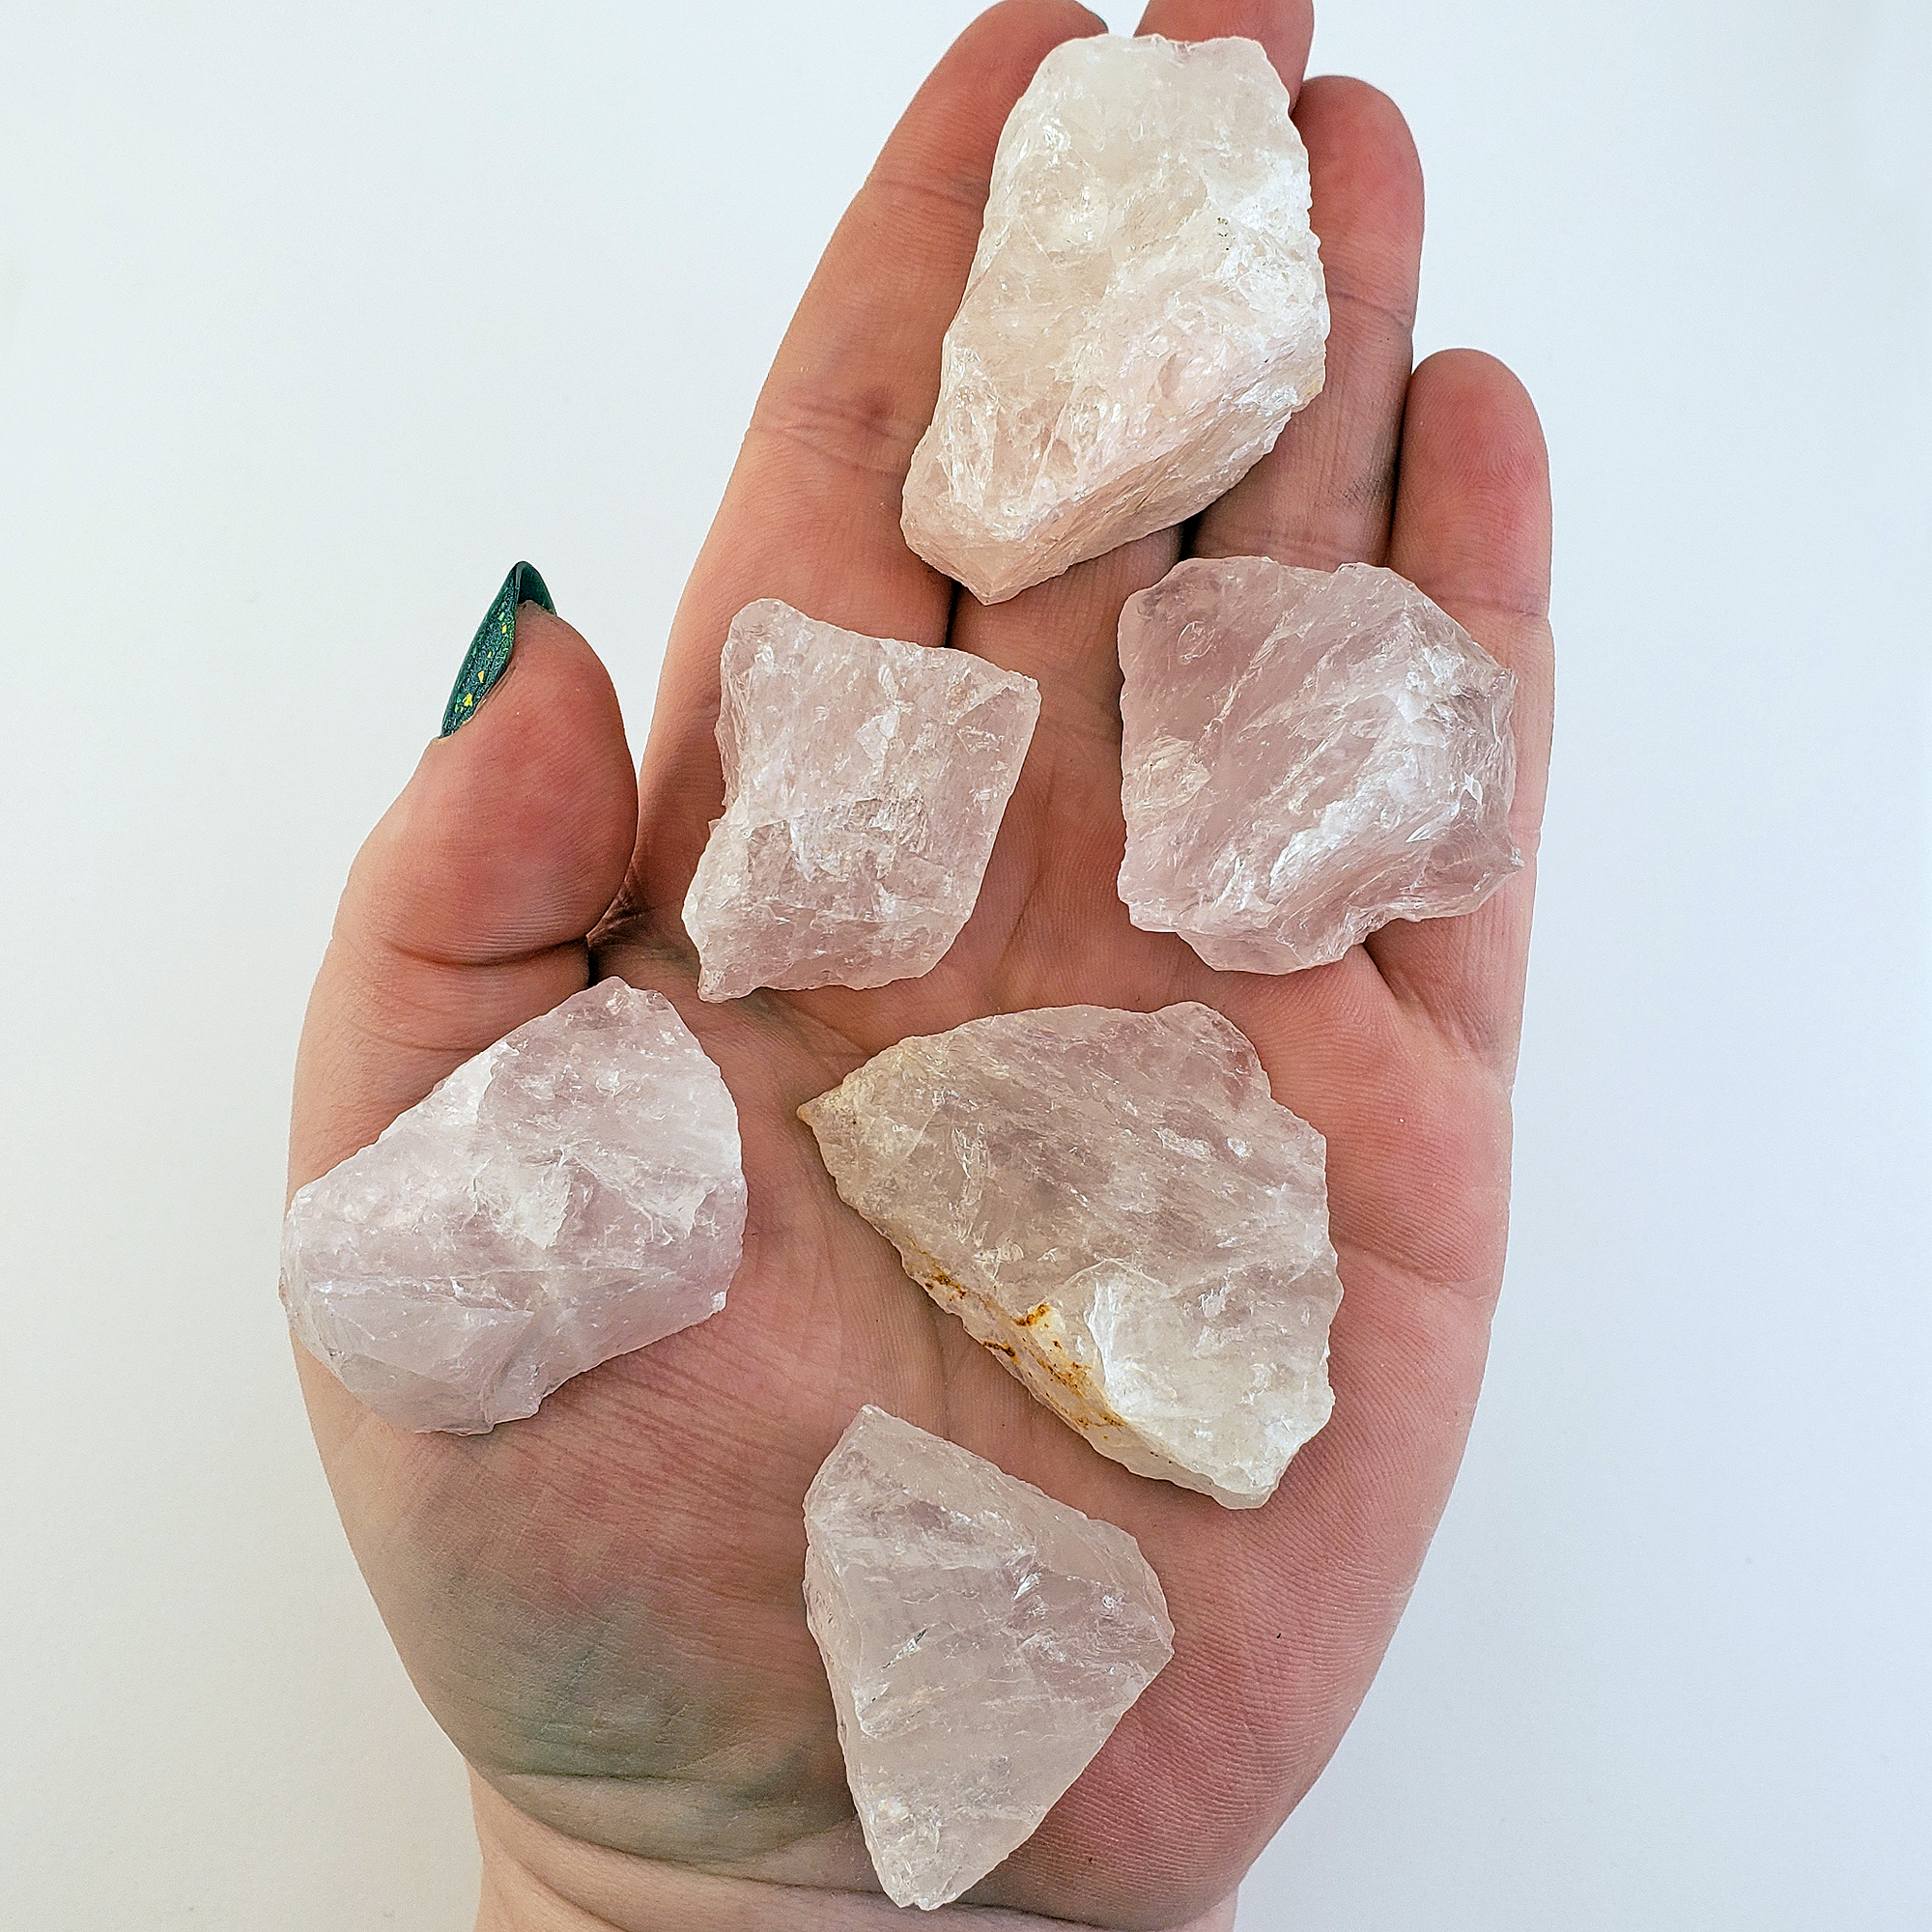 Rose Quartz Raw Crystal Rough Gemstone - Small One Stone - In Hand, White Background